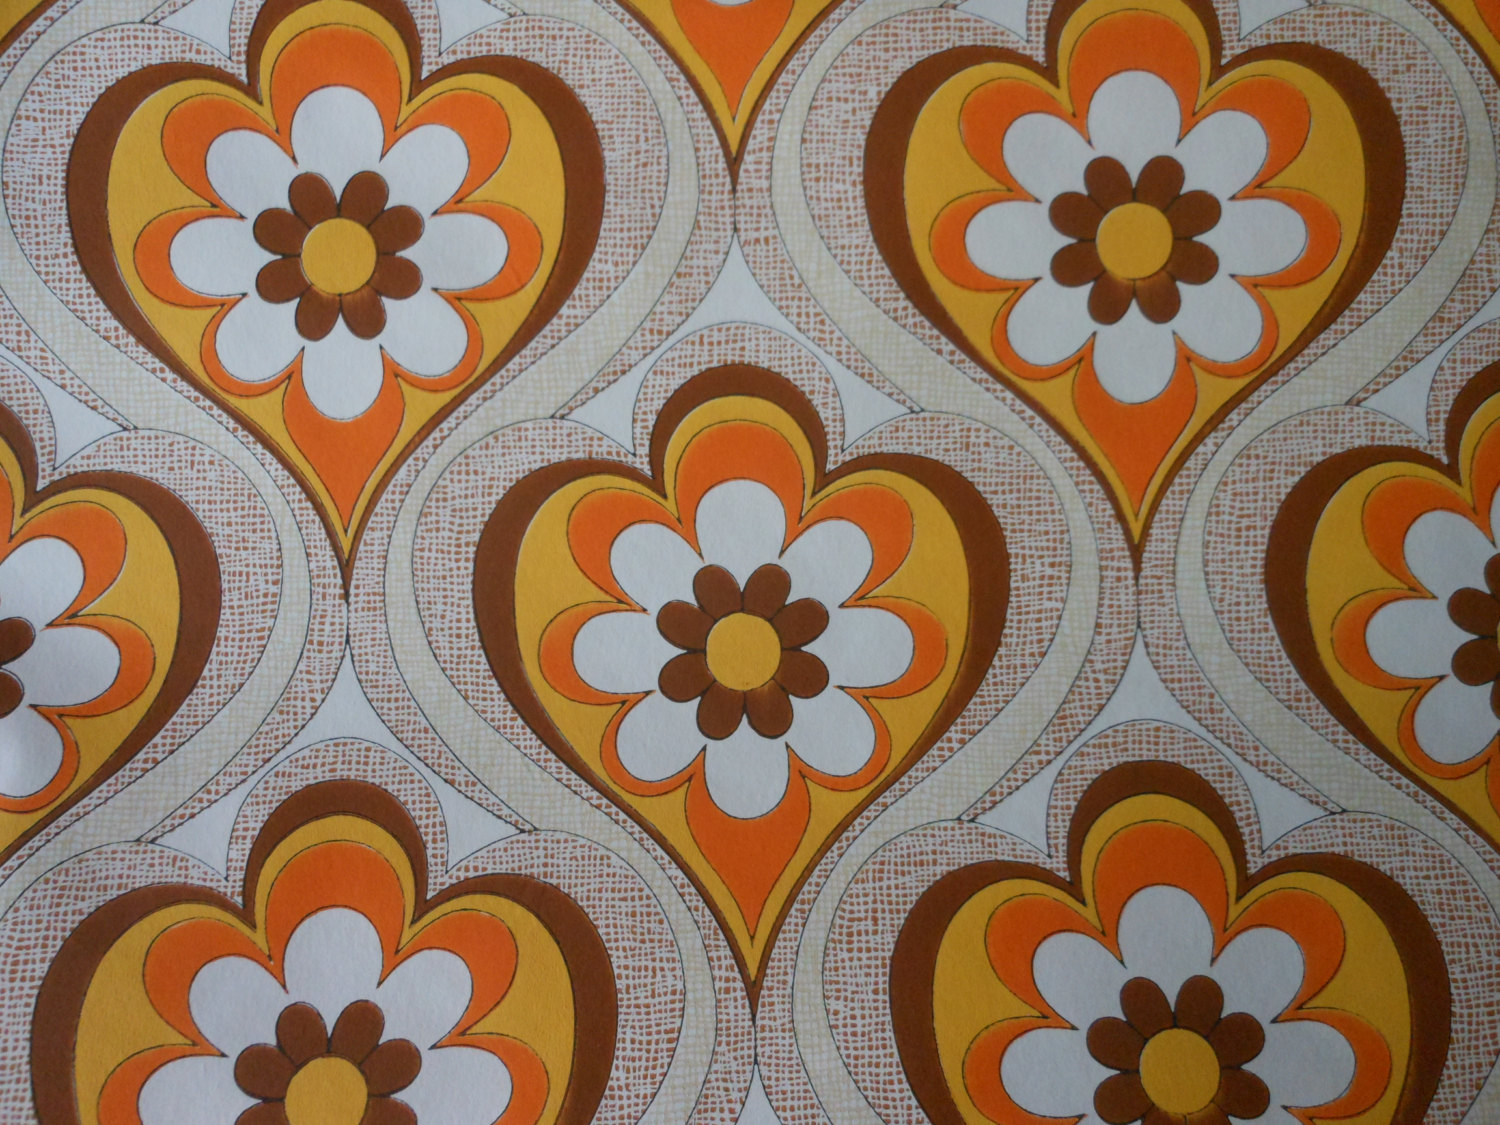 Retro Wallpaper by the Yard 70s Vintage Wallpaper \u2013 1970s Vintage Wallpaper Orange Damask